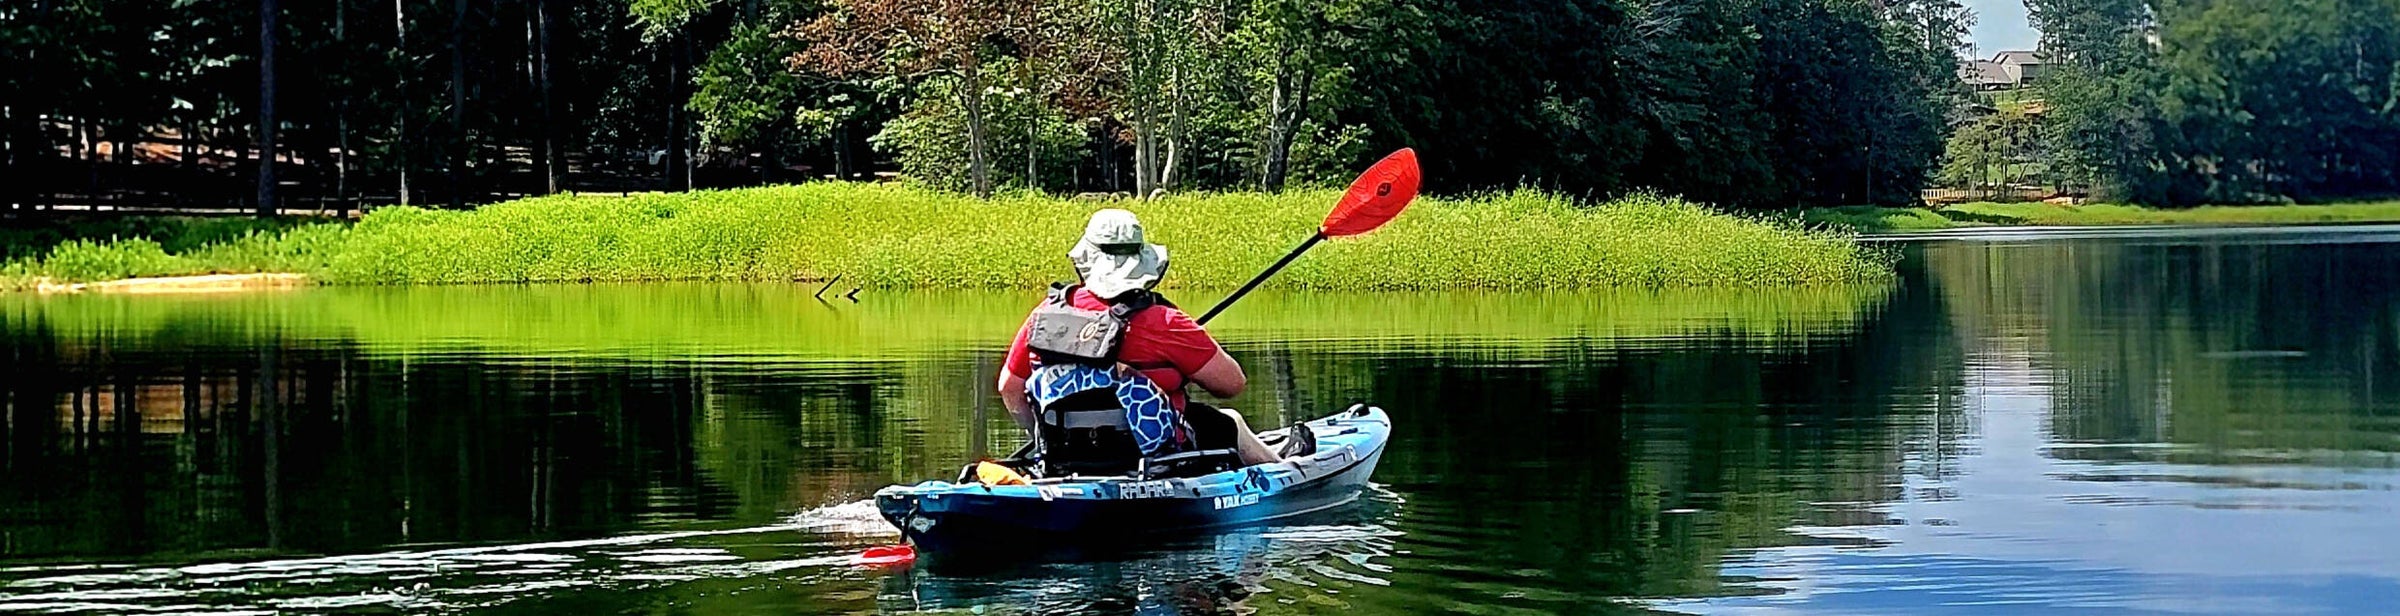 Home  Yak Hobby - High Quality Kayak Parts and Accessories